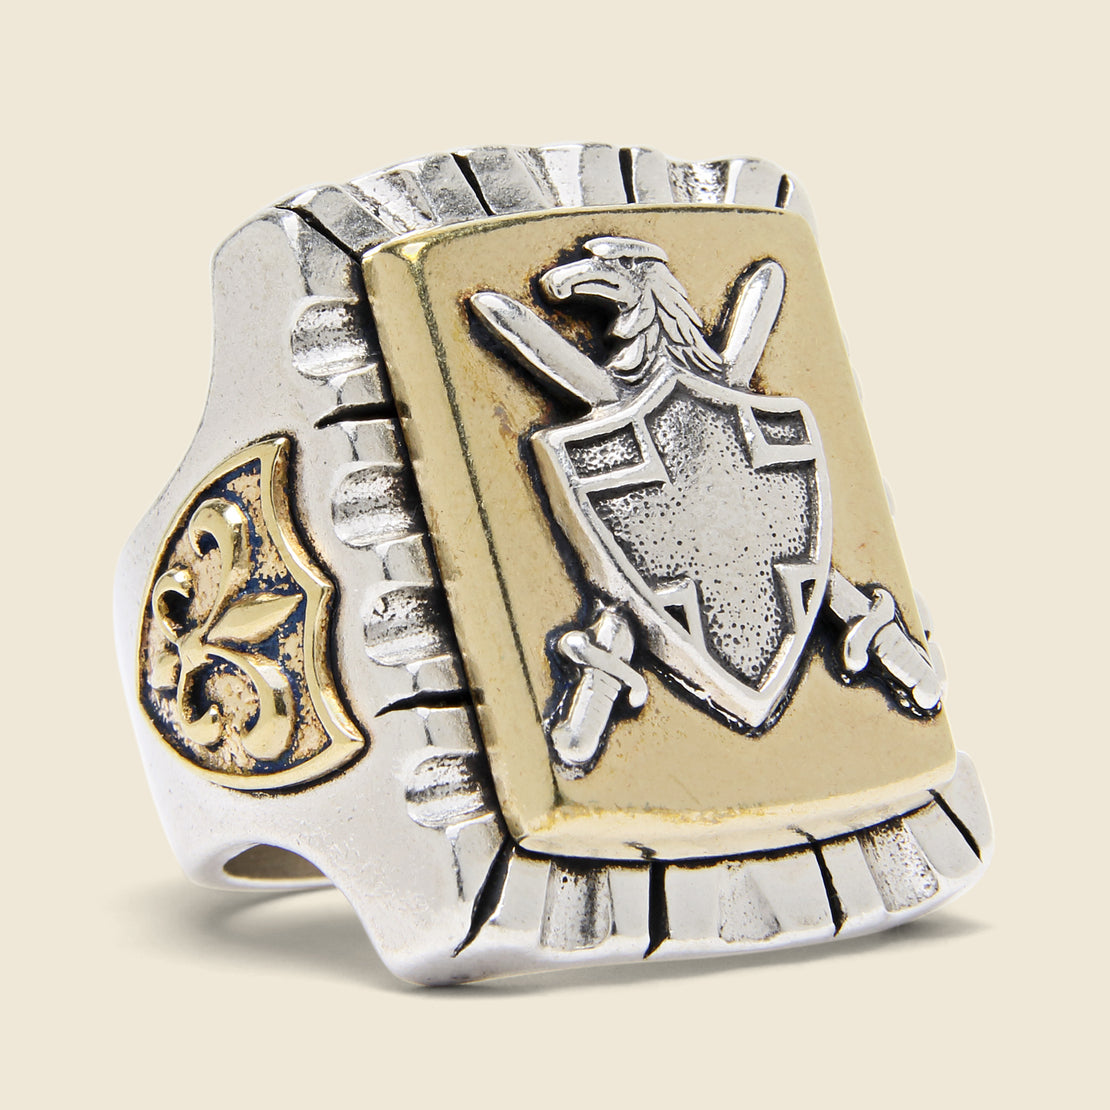 LHN Jewelry Coat of Arms Souvenir Ring - Silver/Brass